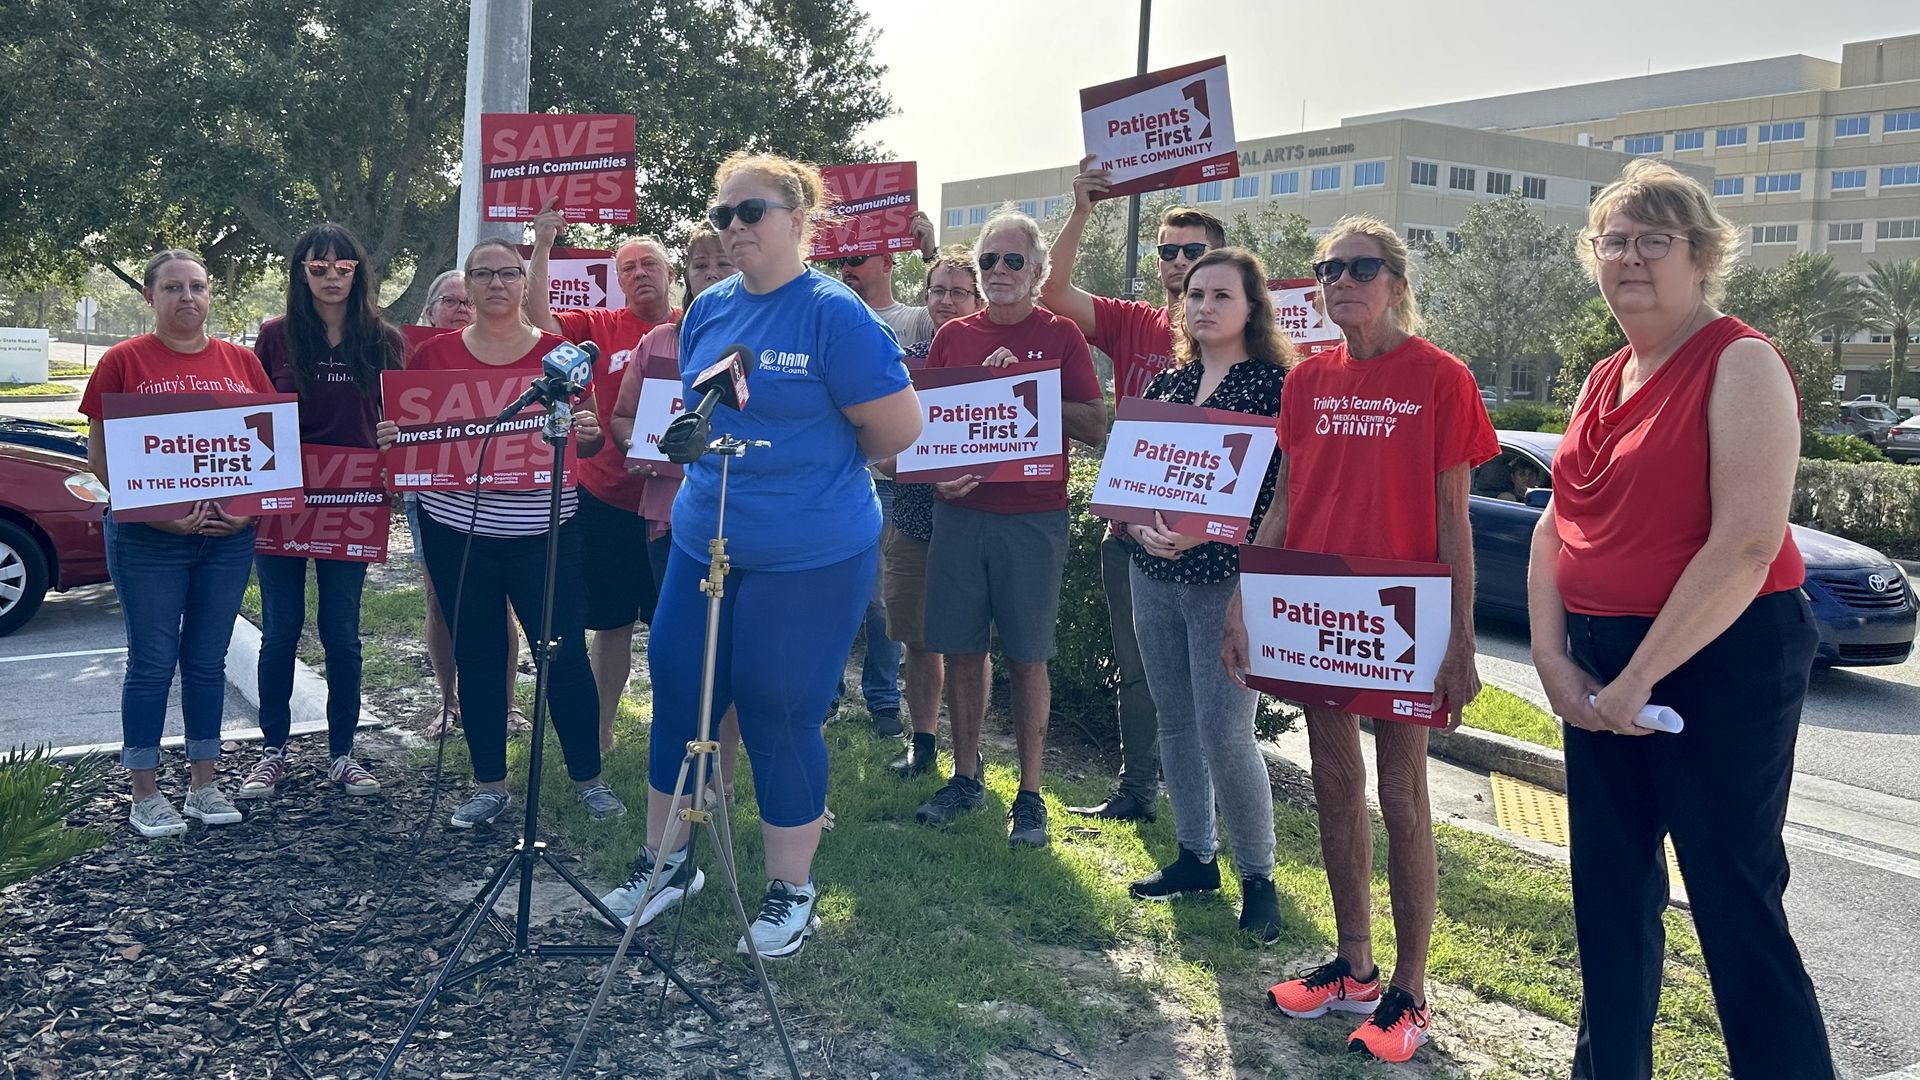 About 15 people wearing red  hold "patients first" and "save lives invest in communities" signs standing behind a woman speaking into two microphones. The hospital can be seen in the background